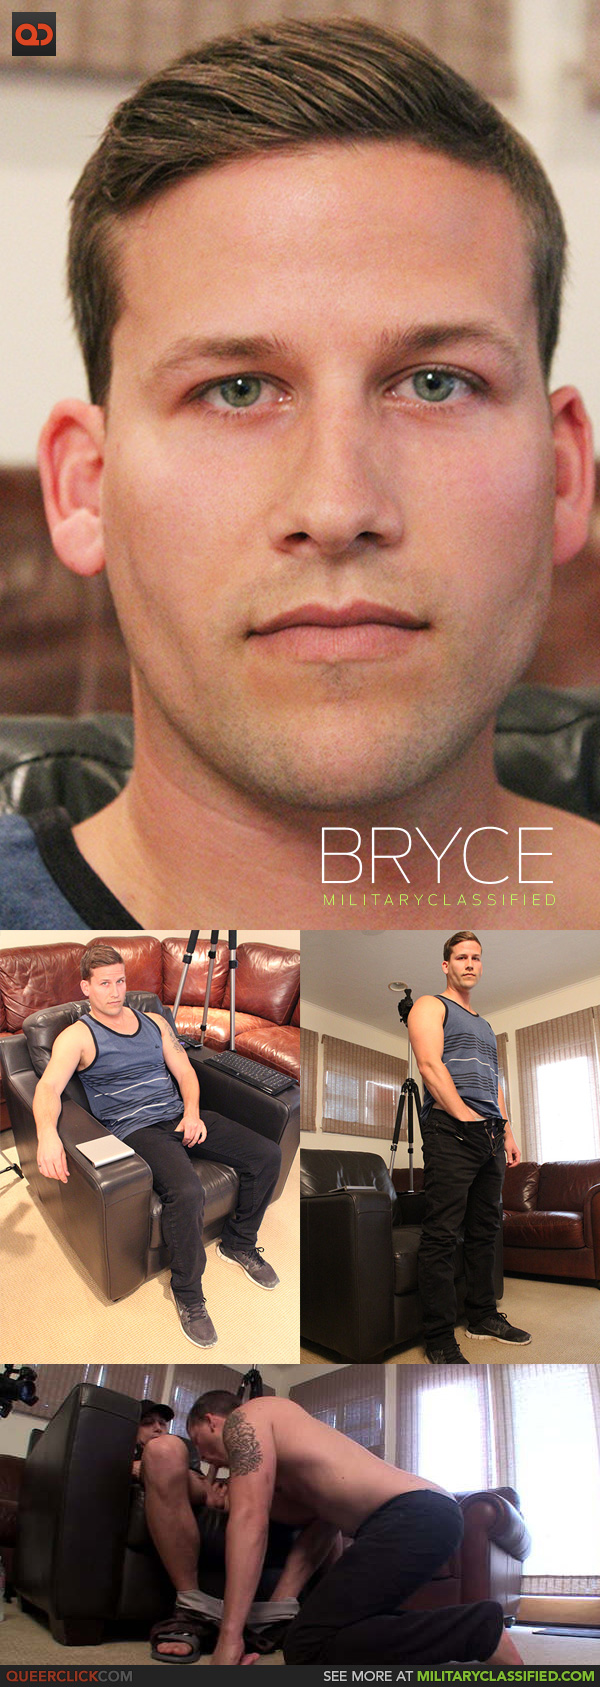 Military Classified: Bryce